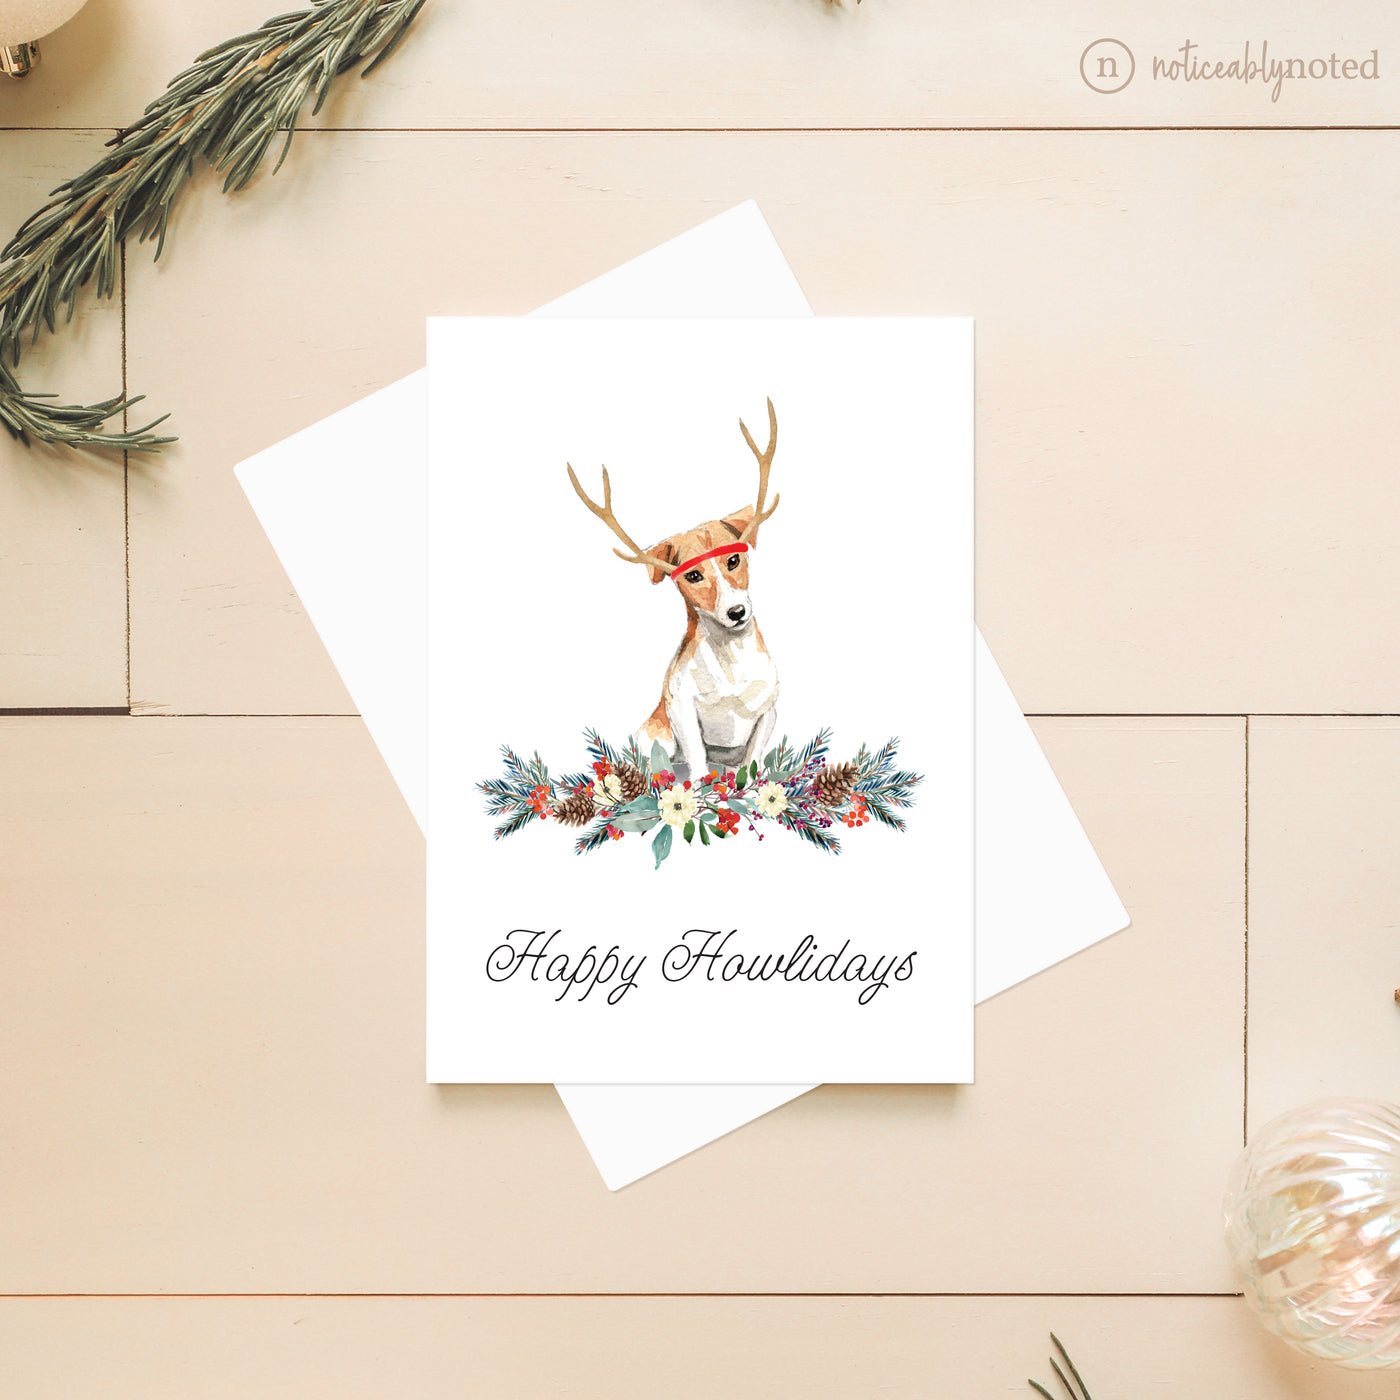 Jack Russell Dog Christmas Cards | Noticeably Noted